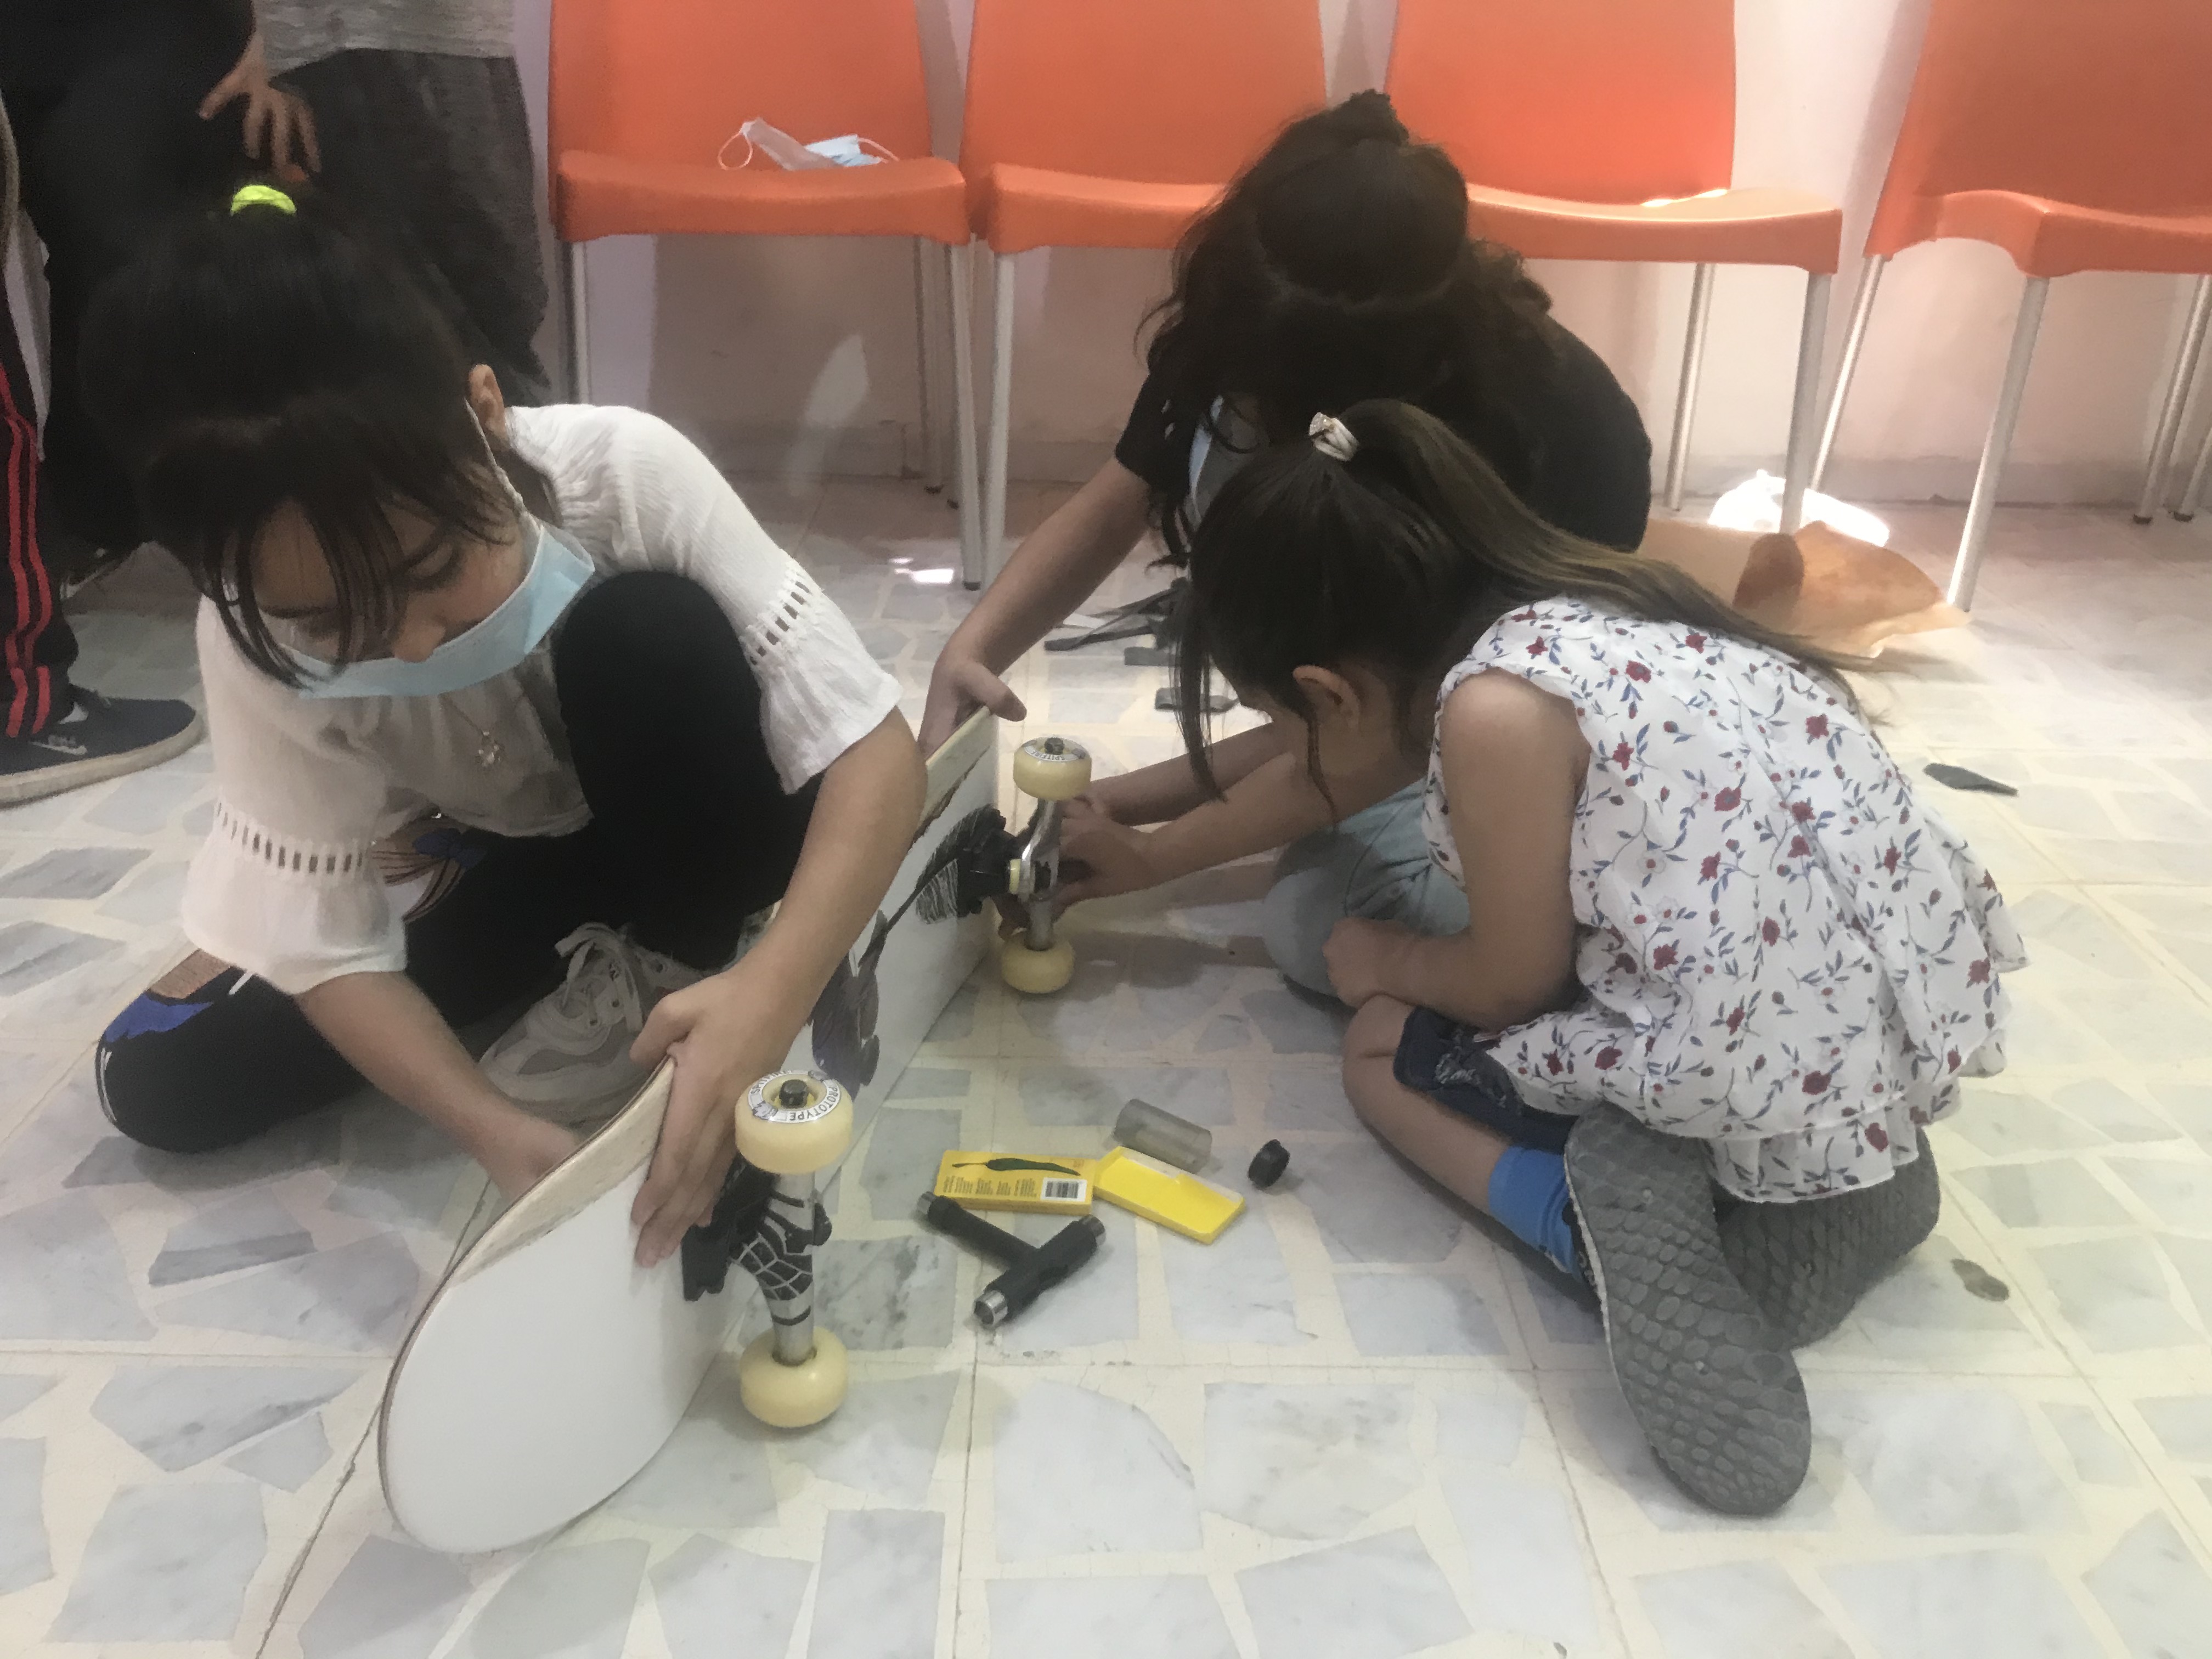 Girls learn how to set up skateboards in Zarqa